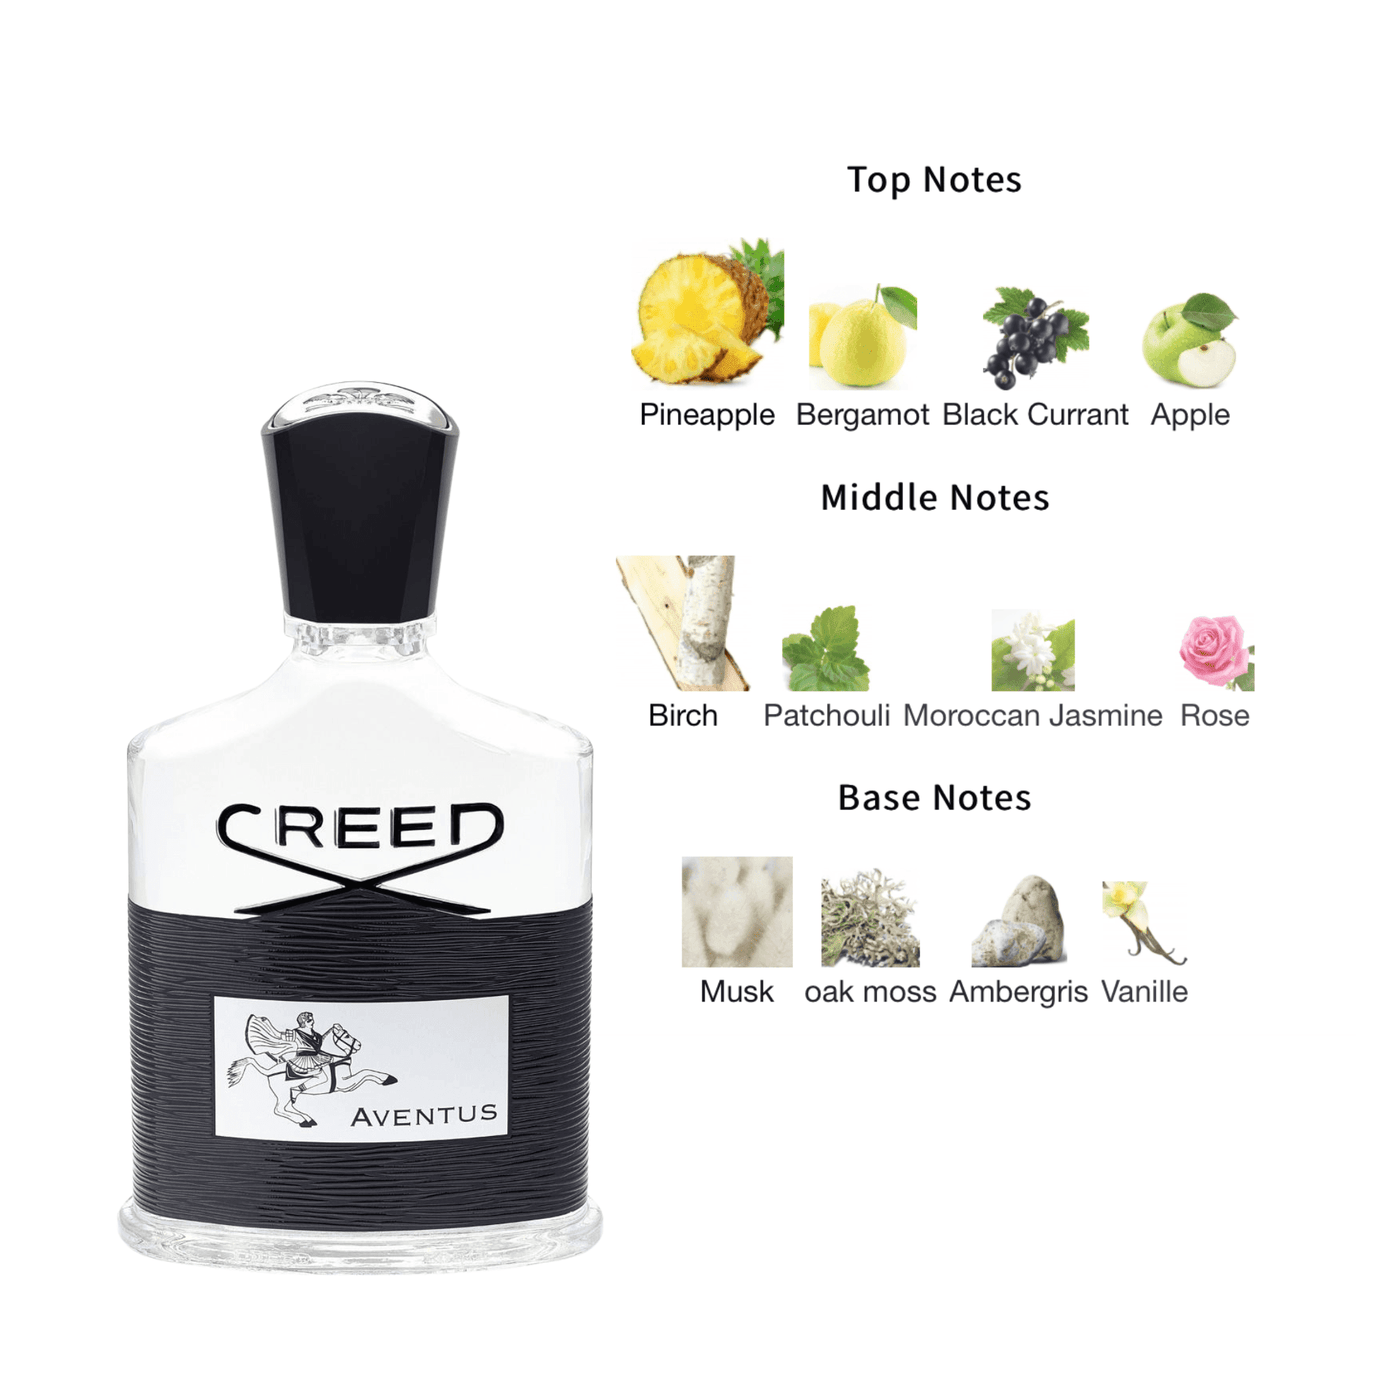 CREED AVENTUS EDP Archives 